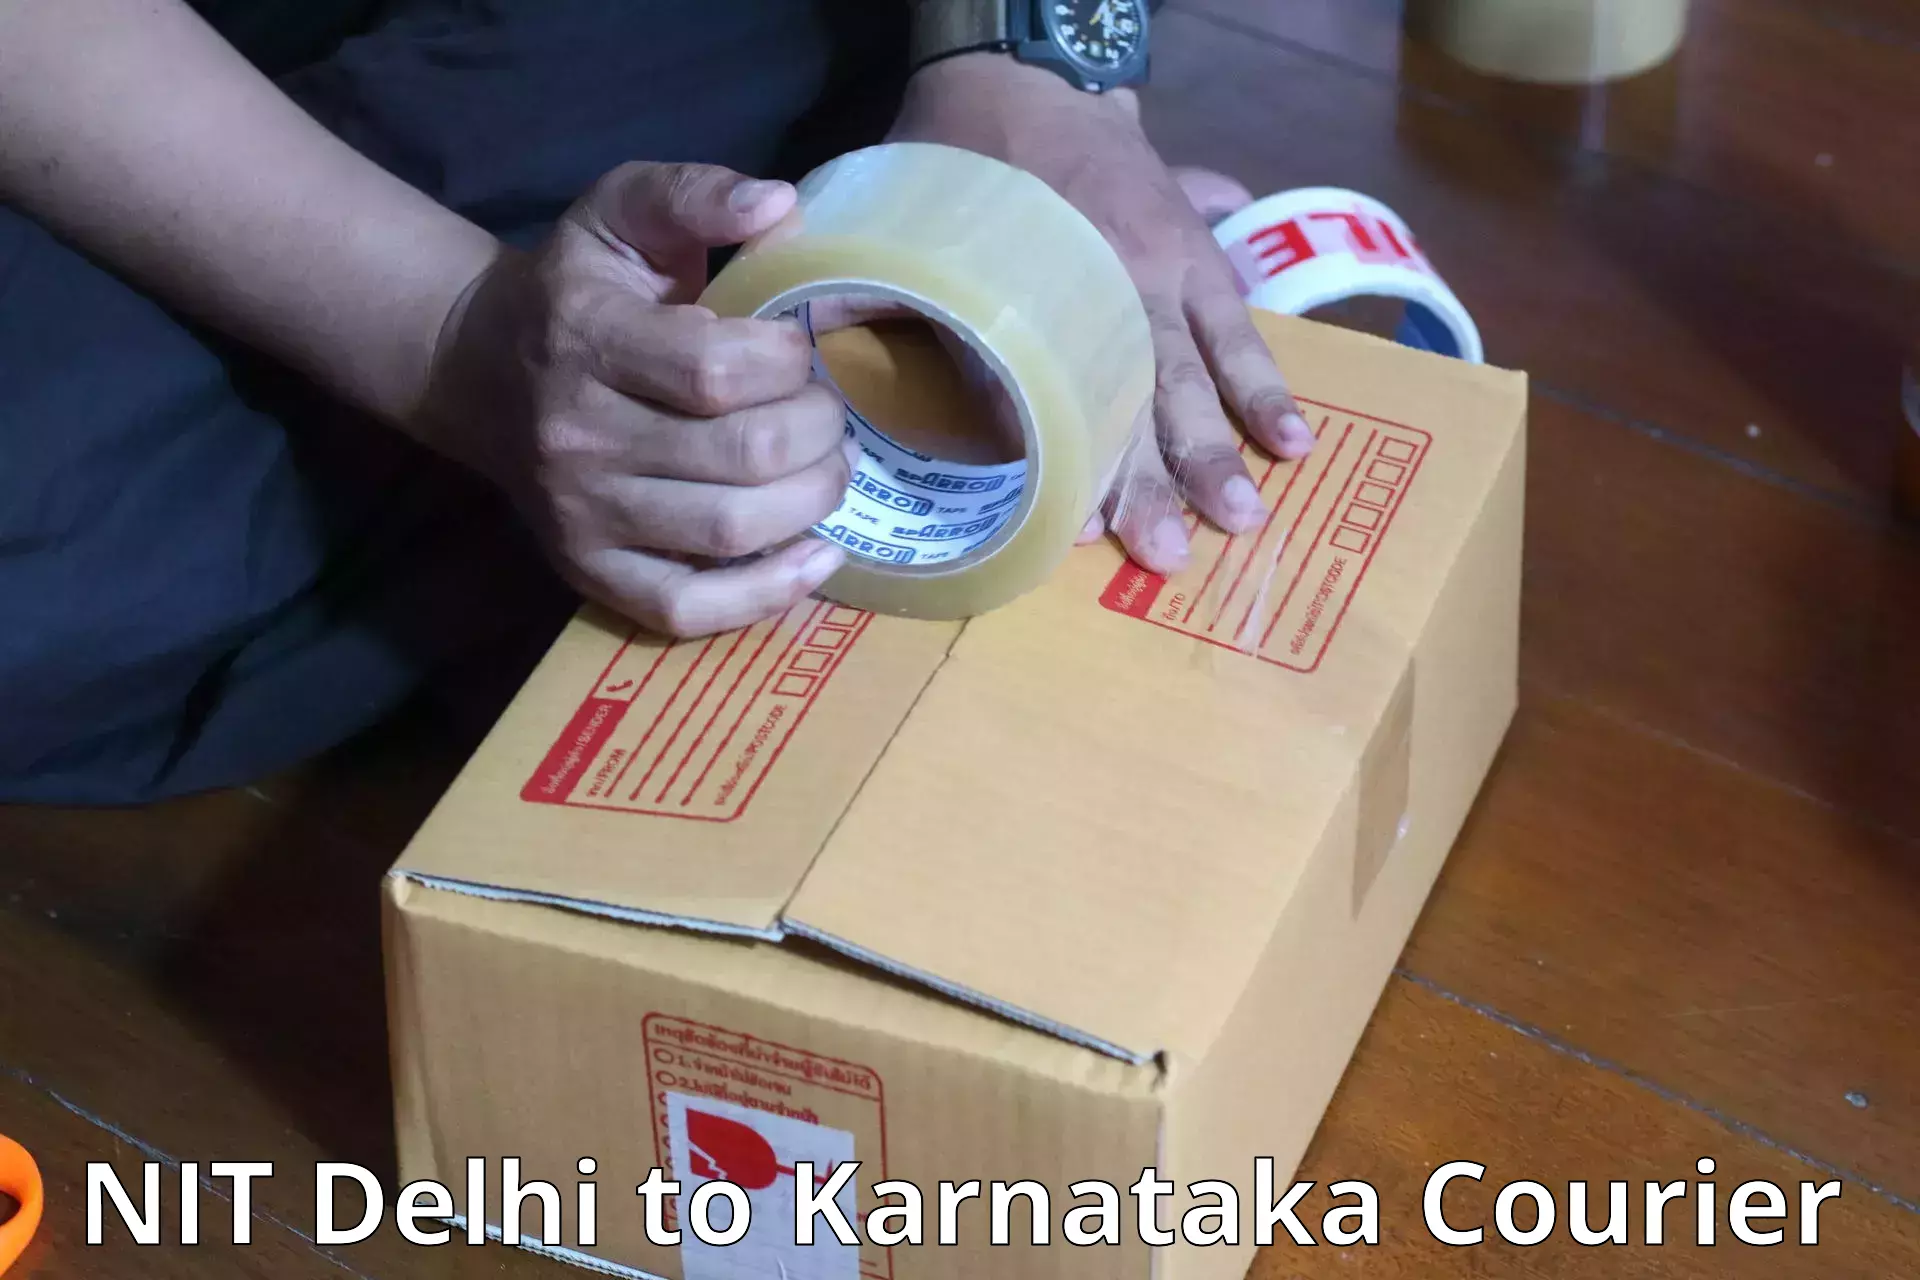 Personal effects shipping NIT Delhi to Anavatti